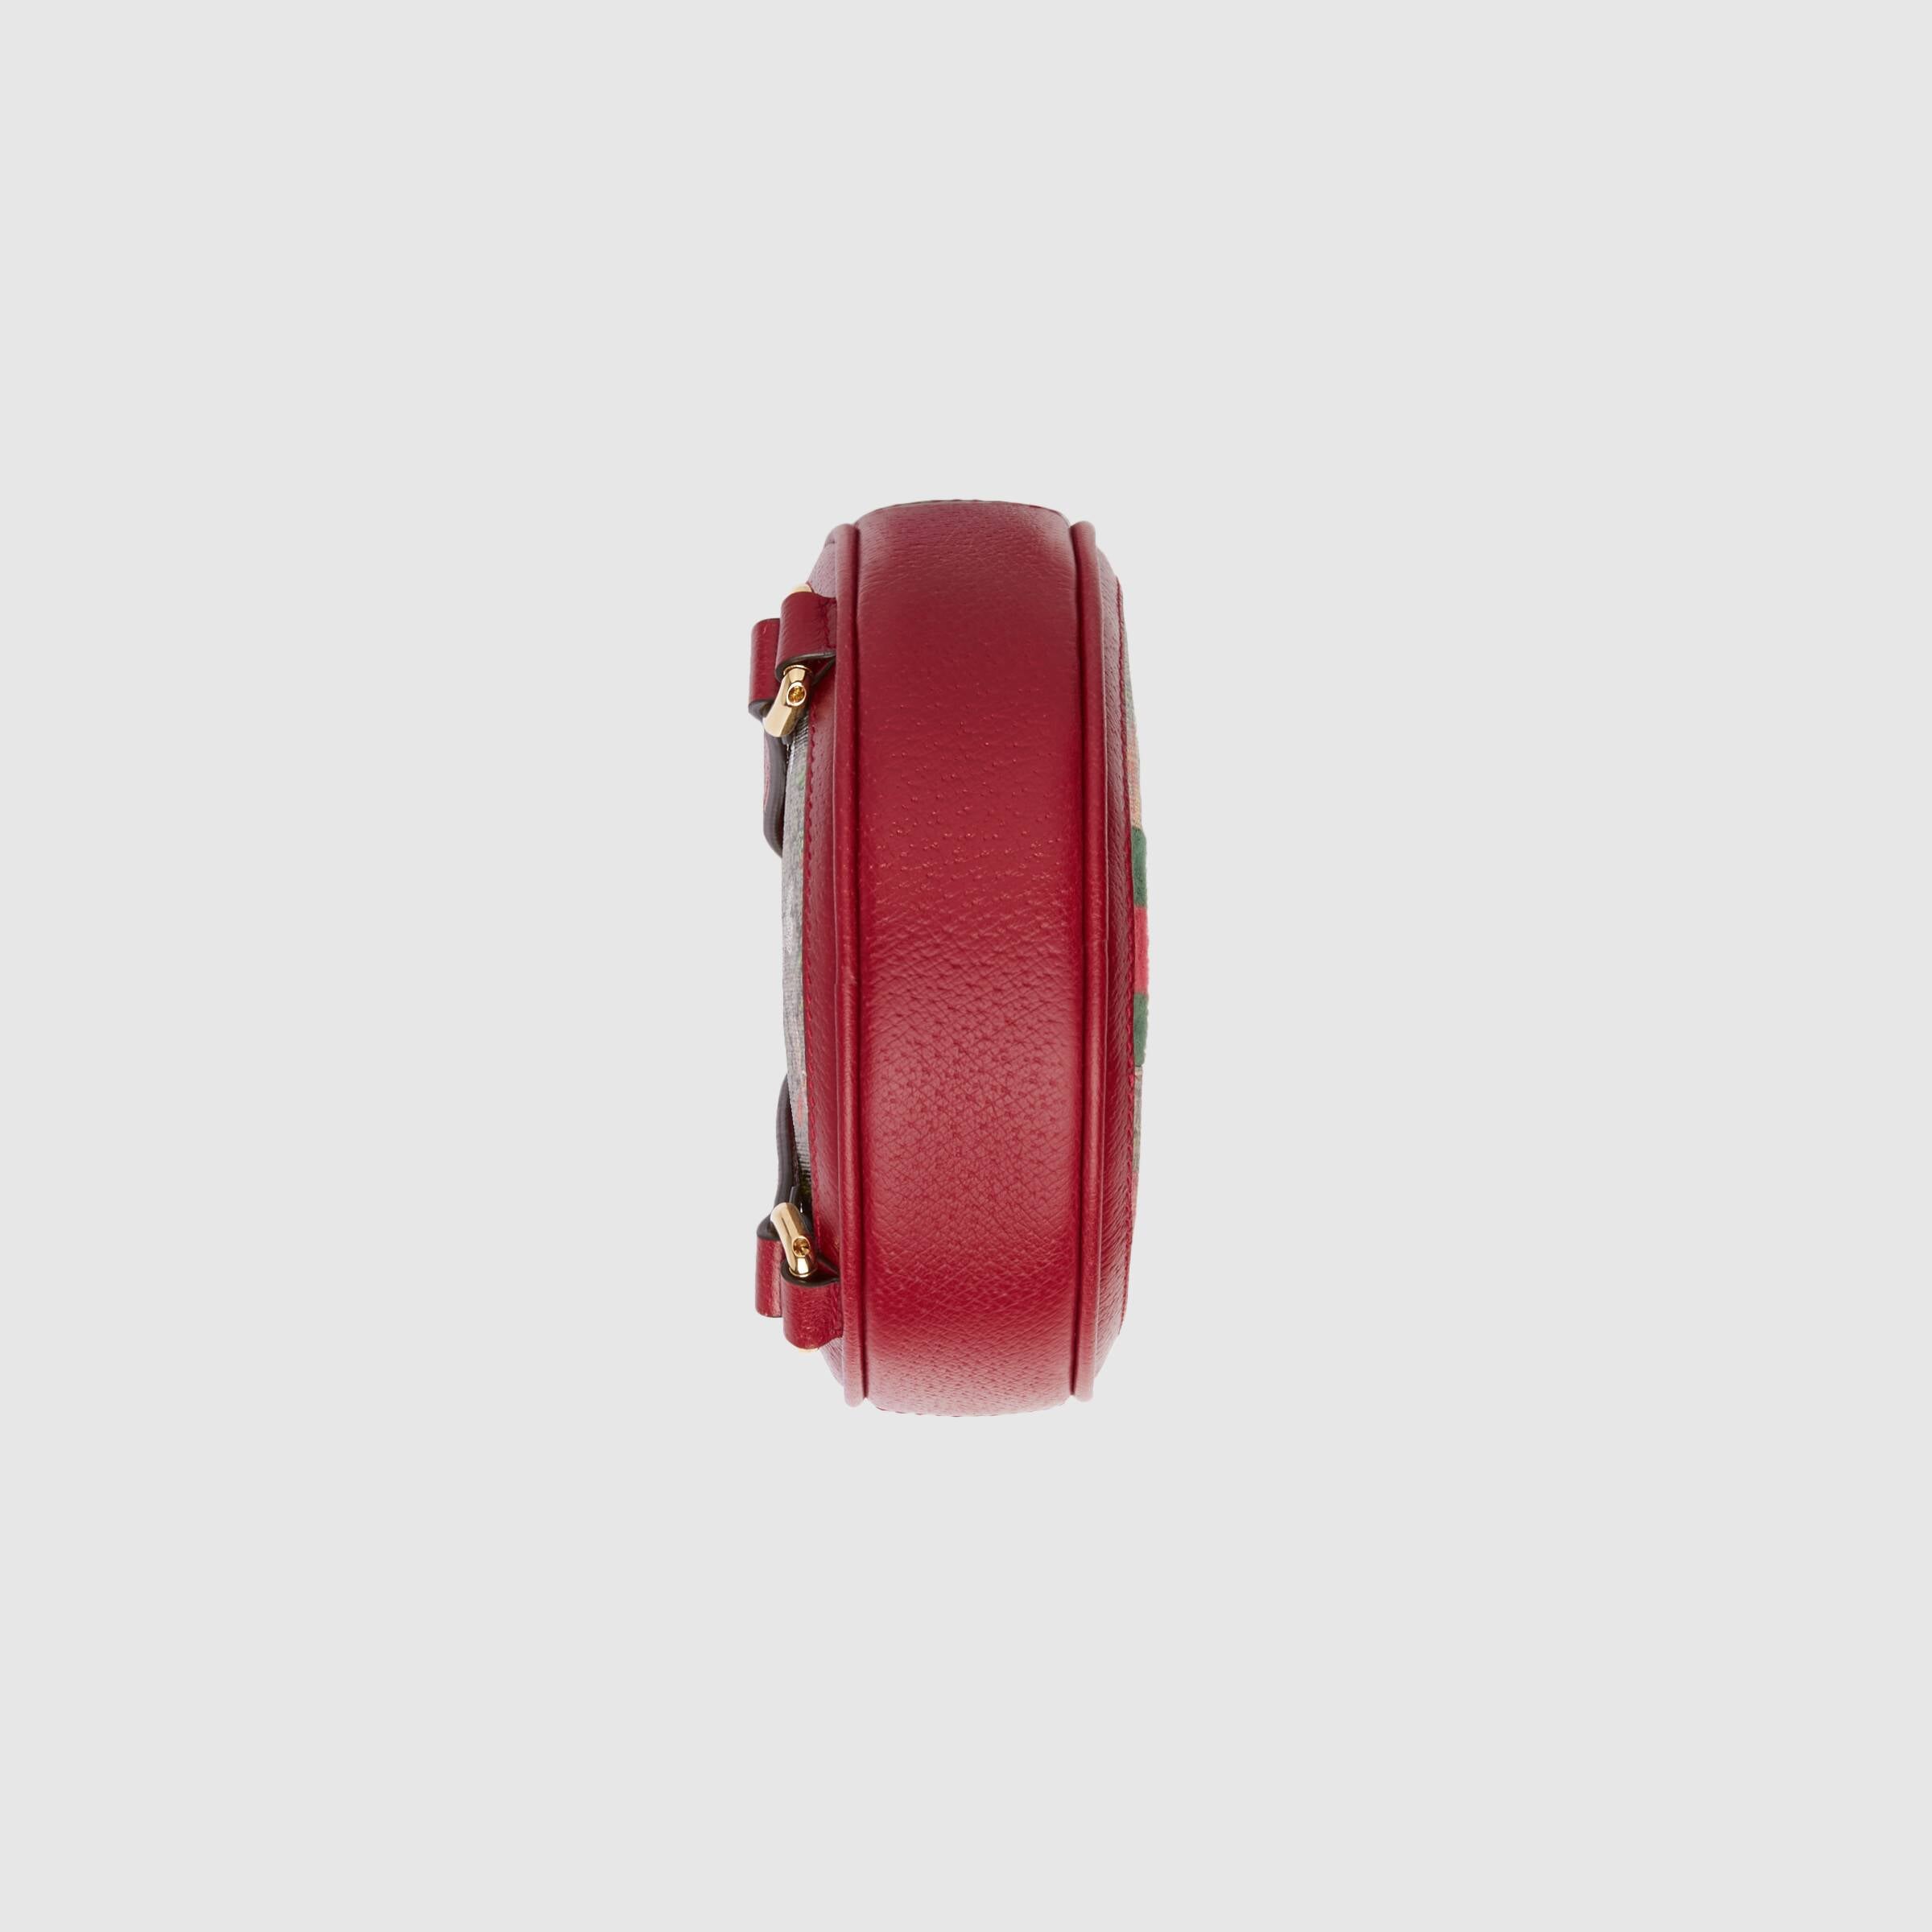 Gucci Ophidia GG Flora Mini Backpack Red